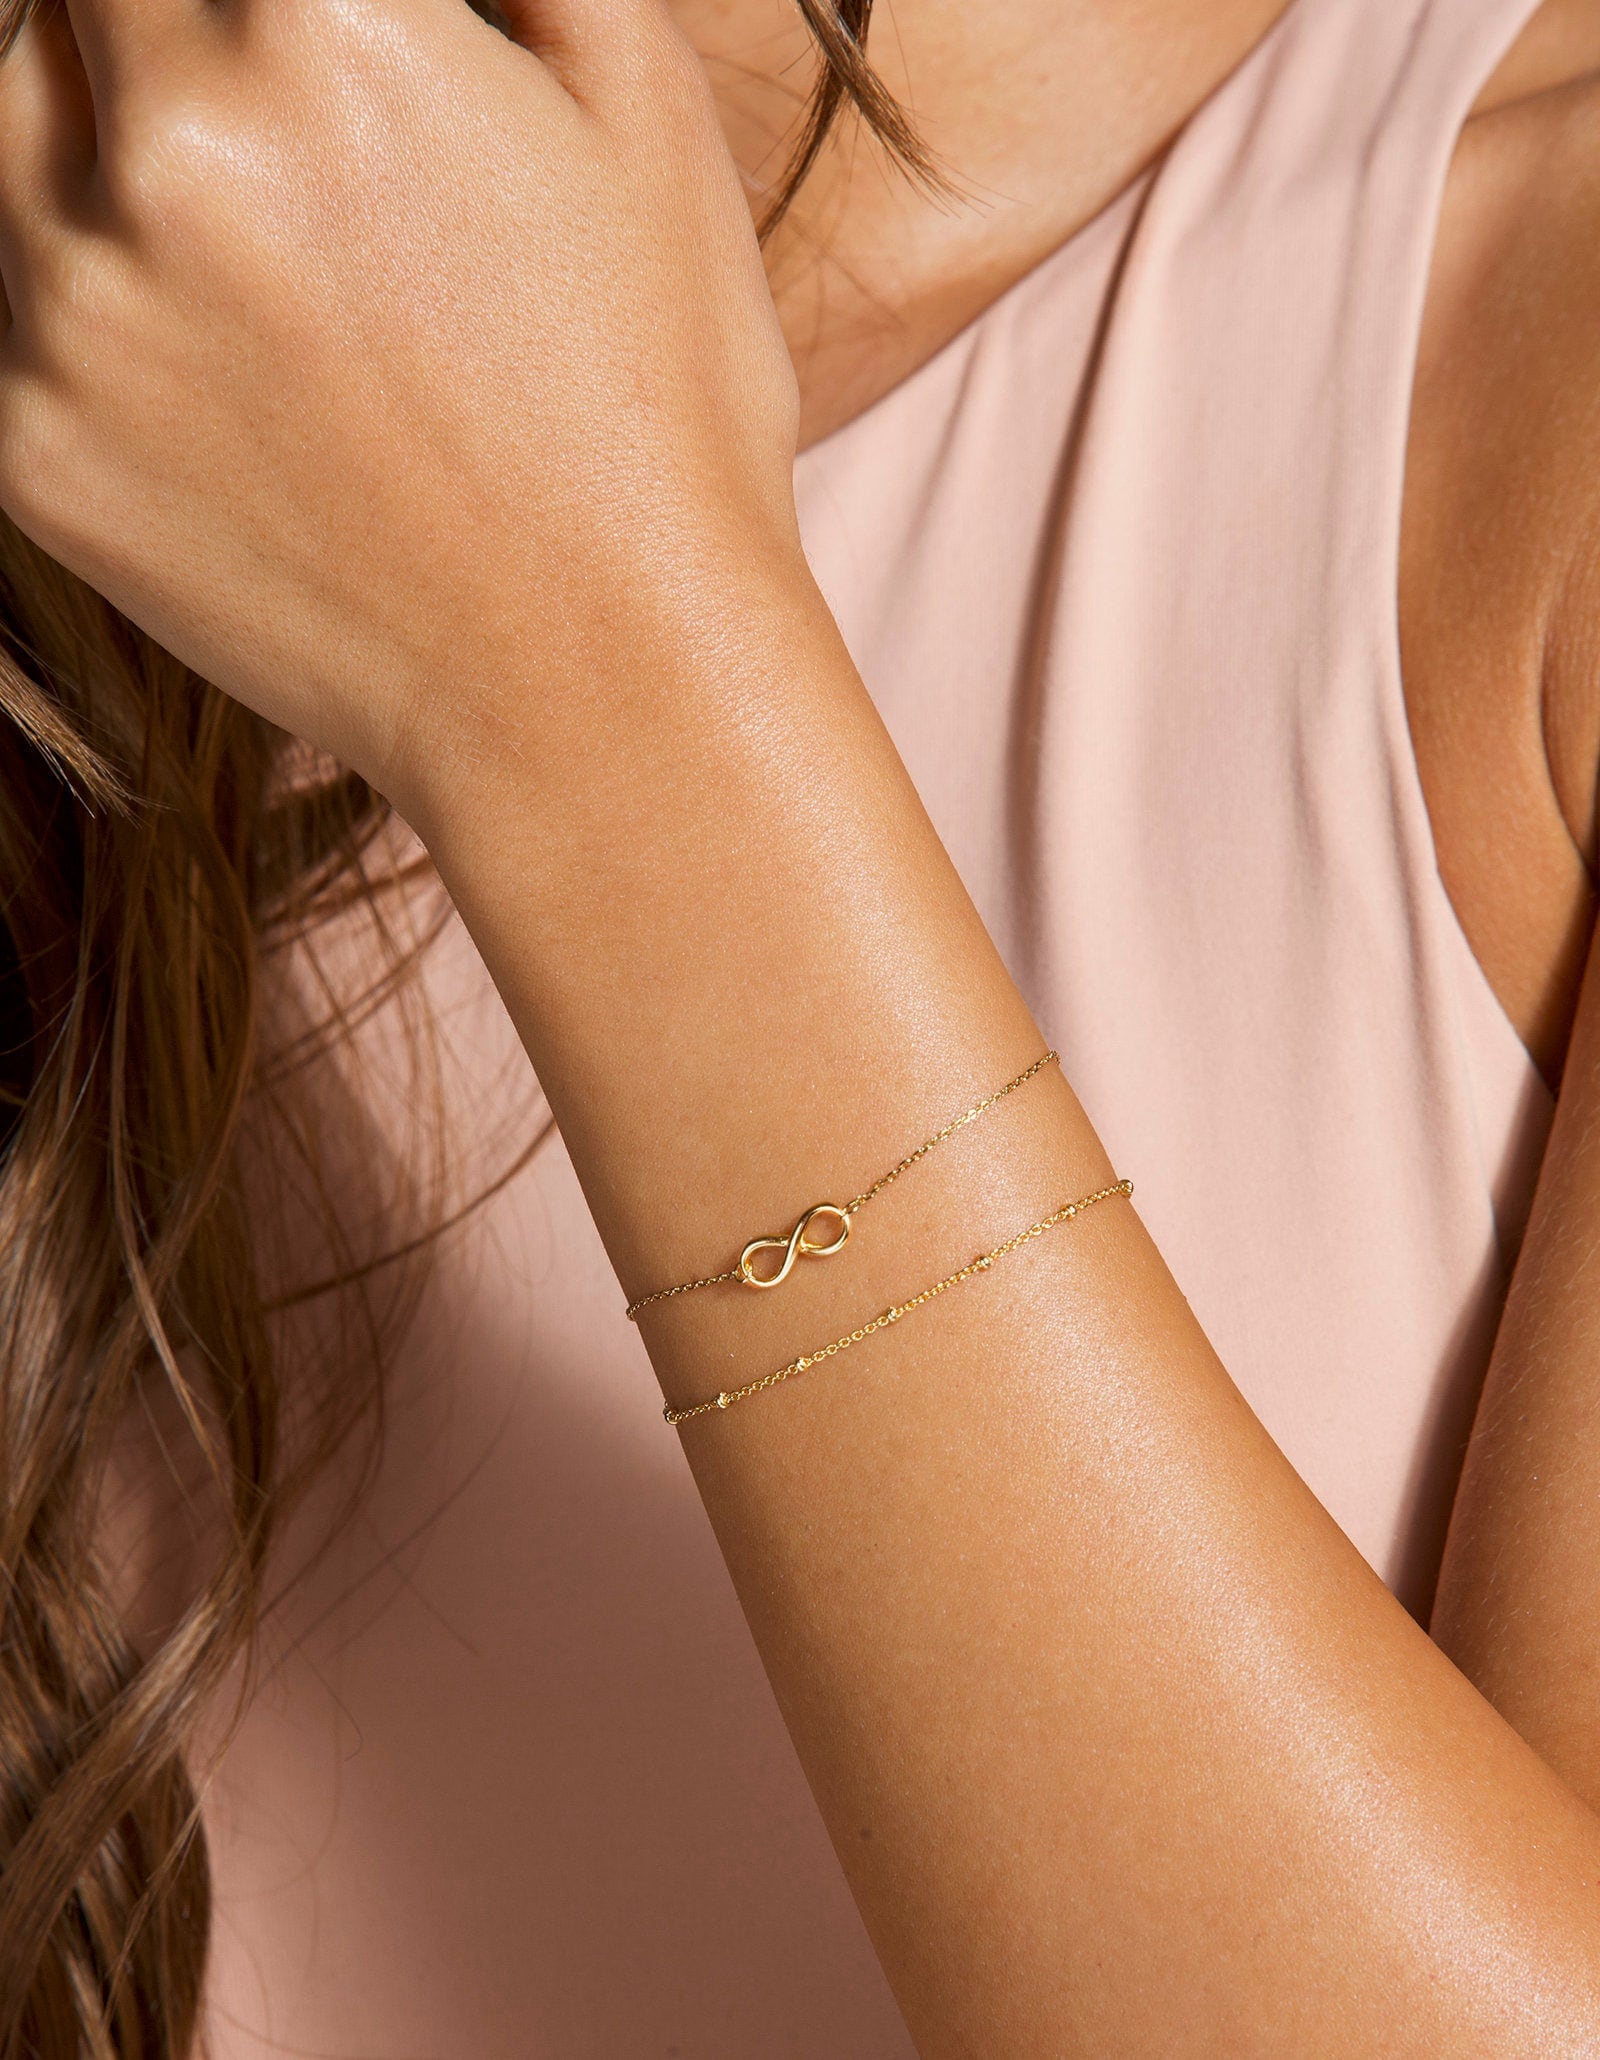 Infinity 2 Names Bracelet in 18k Gold Plating over 925 Sterling Silver |  JOYAMO - Personalized Jewelry